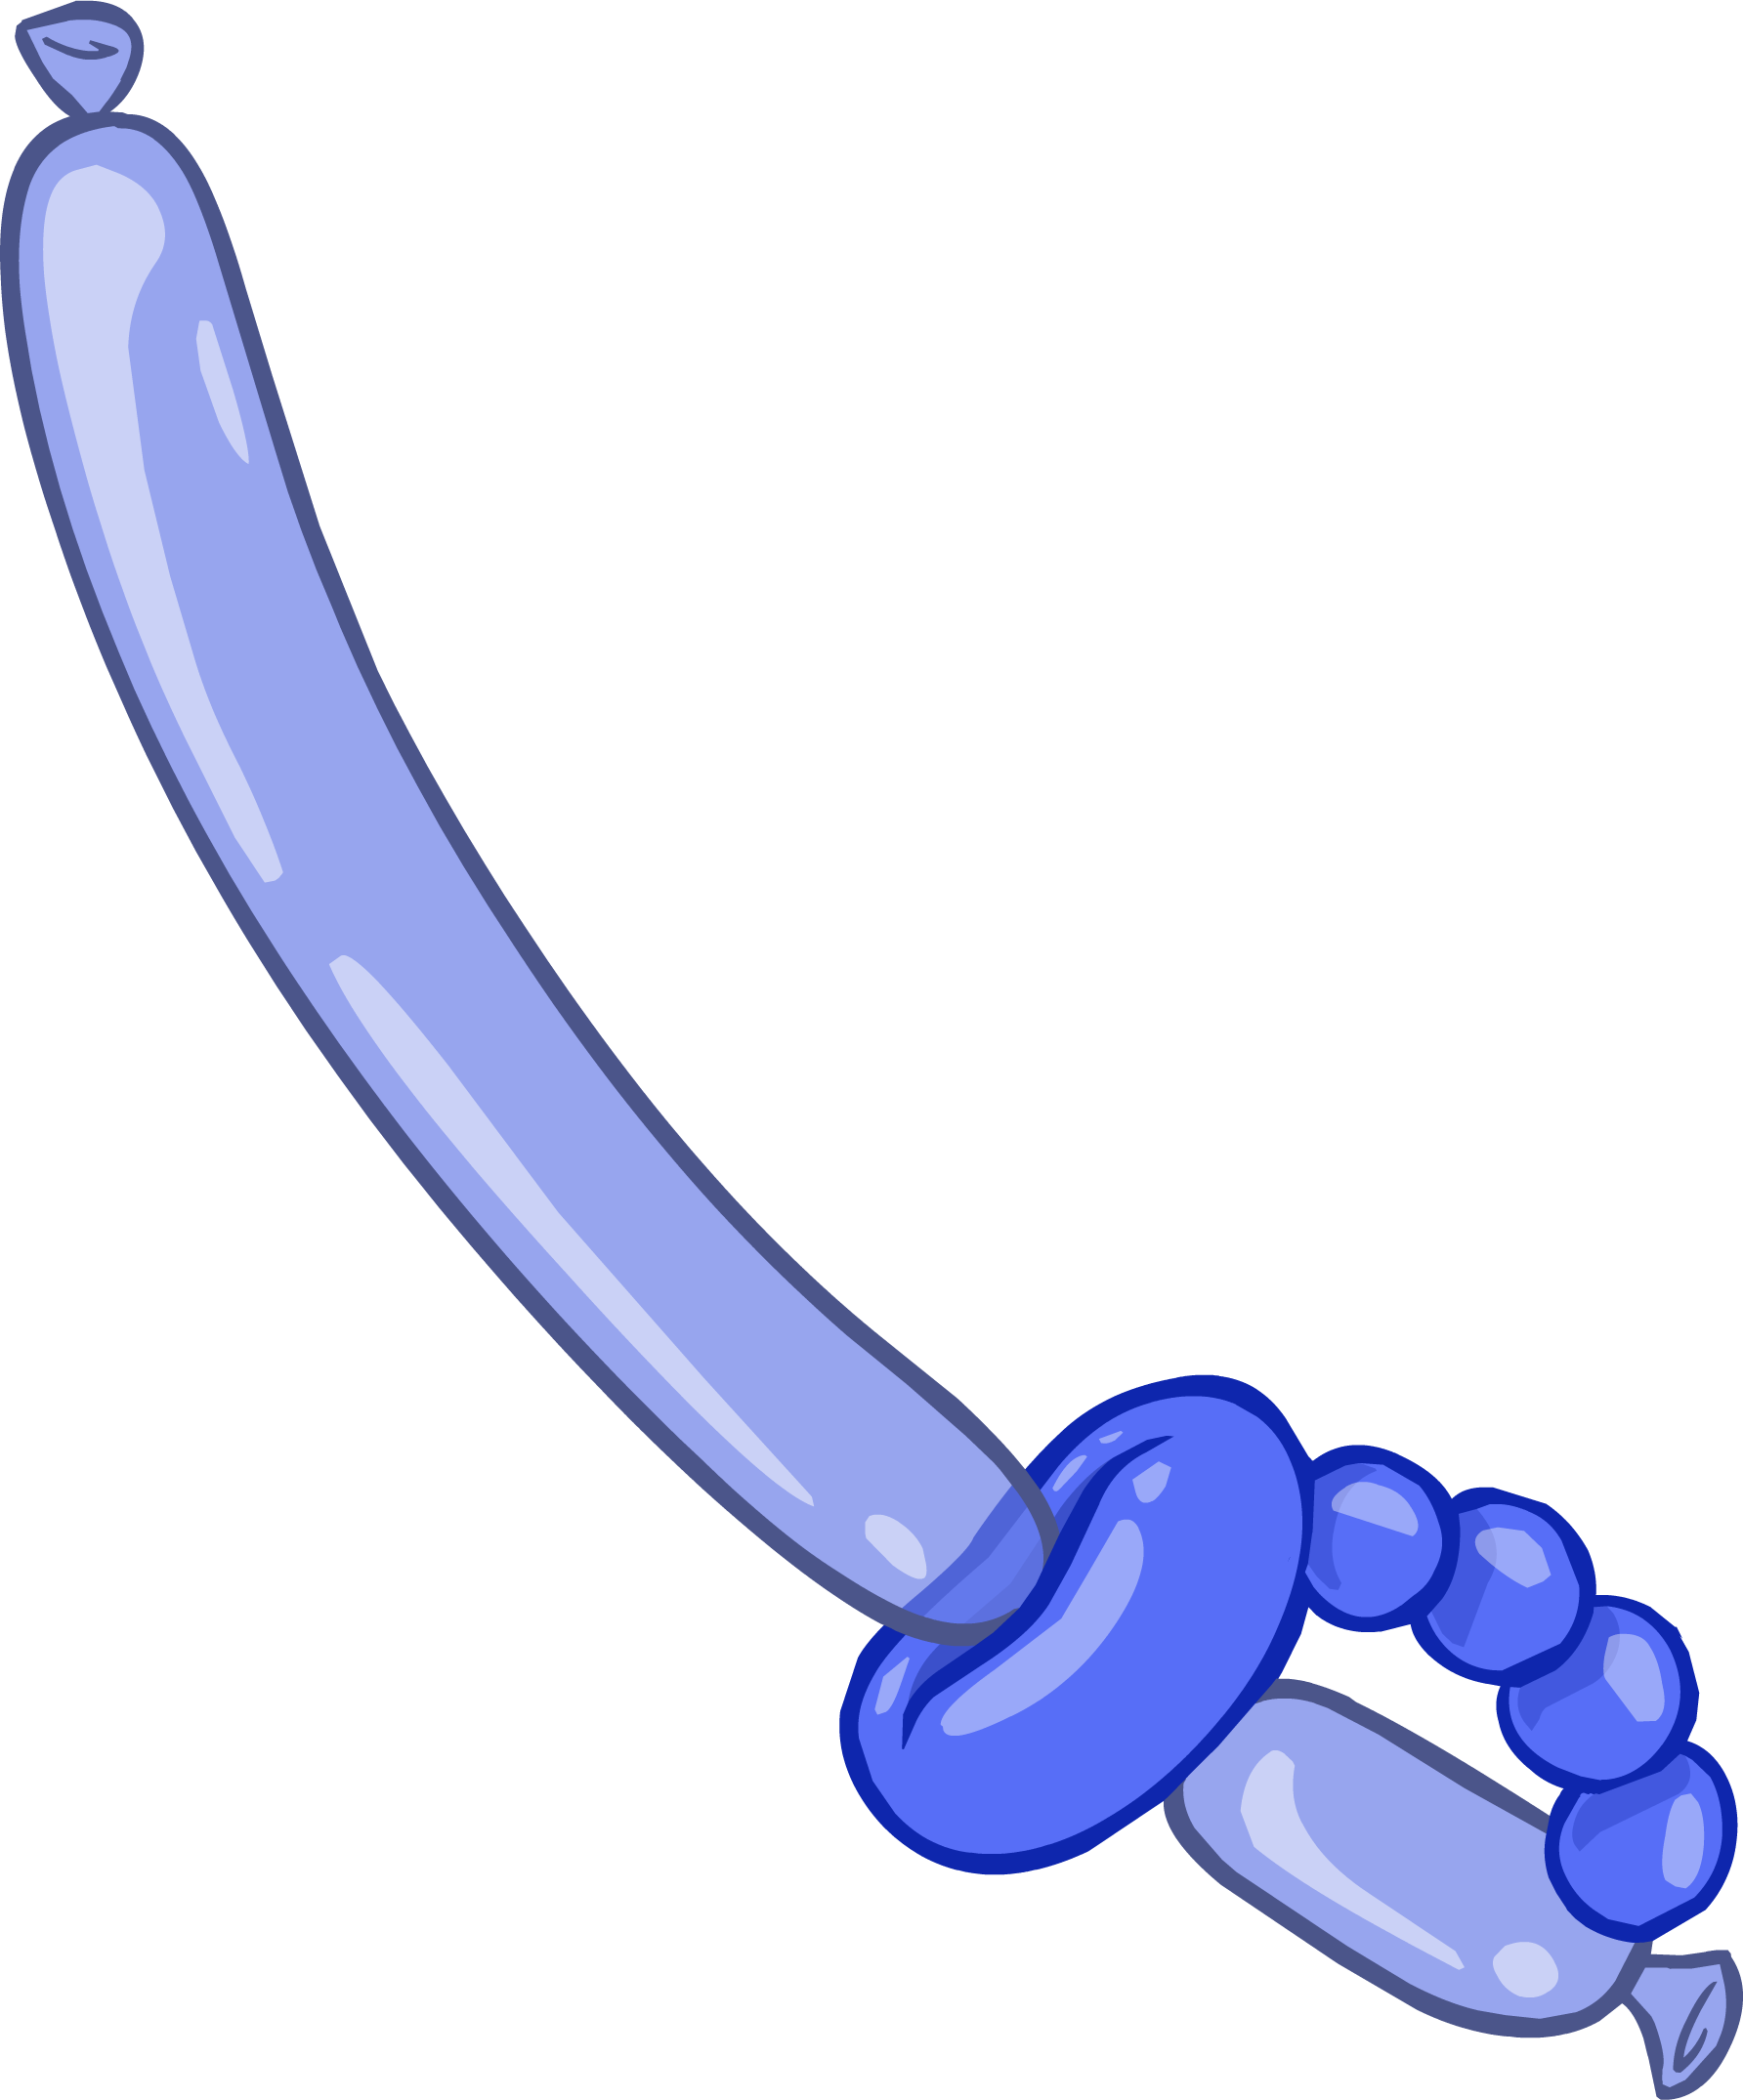 His Ballon Sword Extends And As It Makes Contacts With - Balloon Sword (1784x2150)